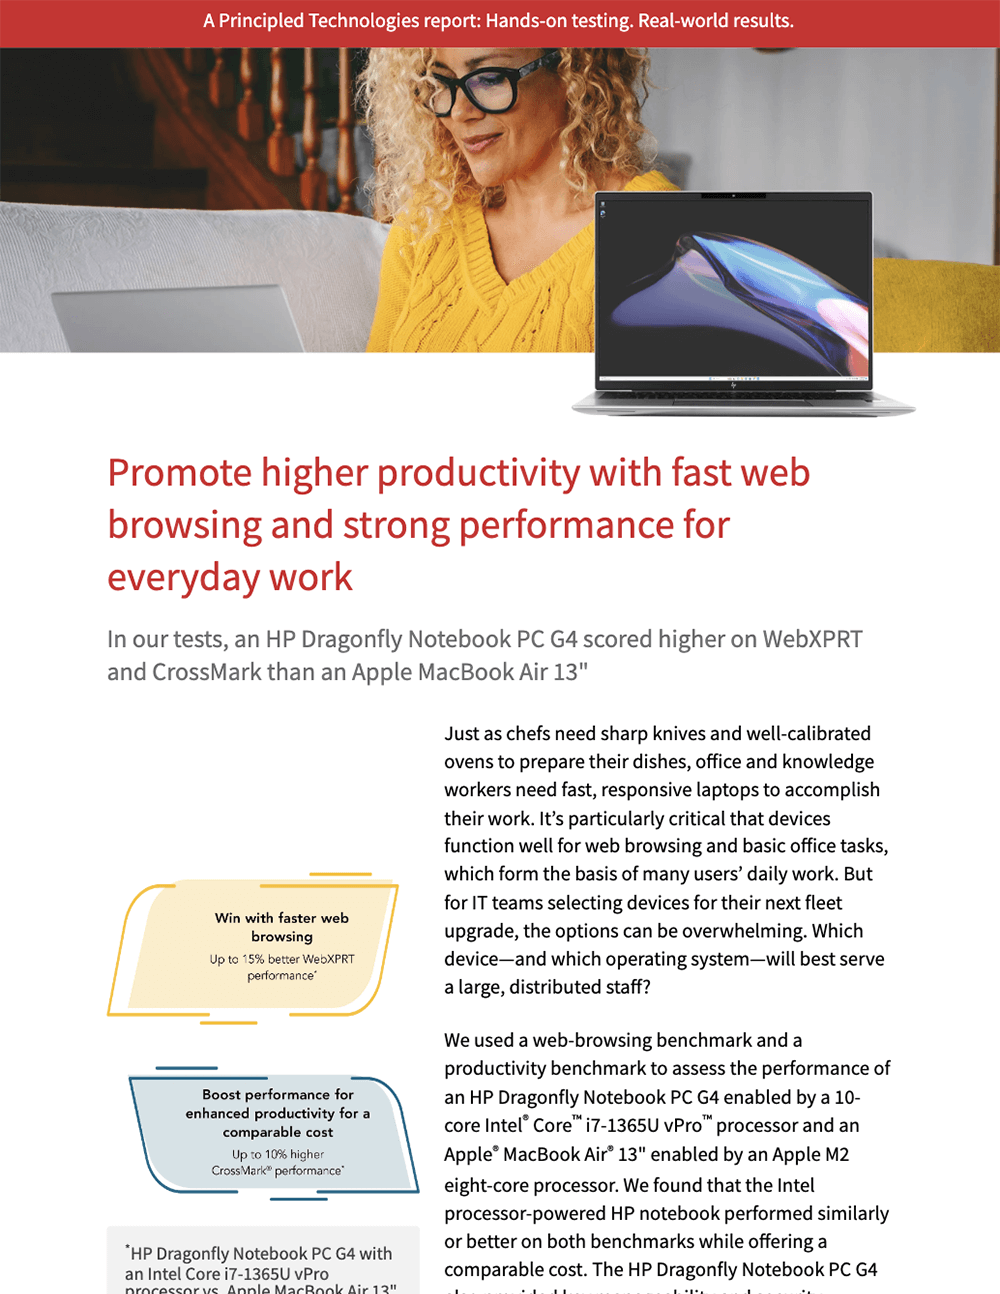 Promote higher productivity with fast web browsing and strong performance for everyday work